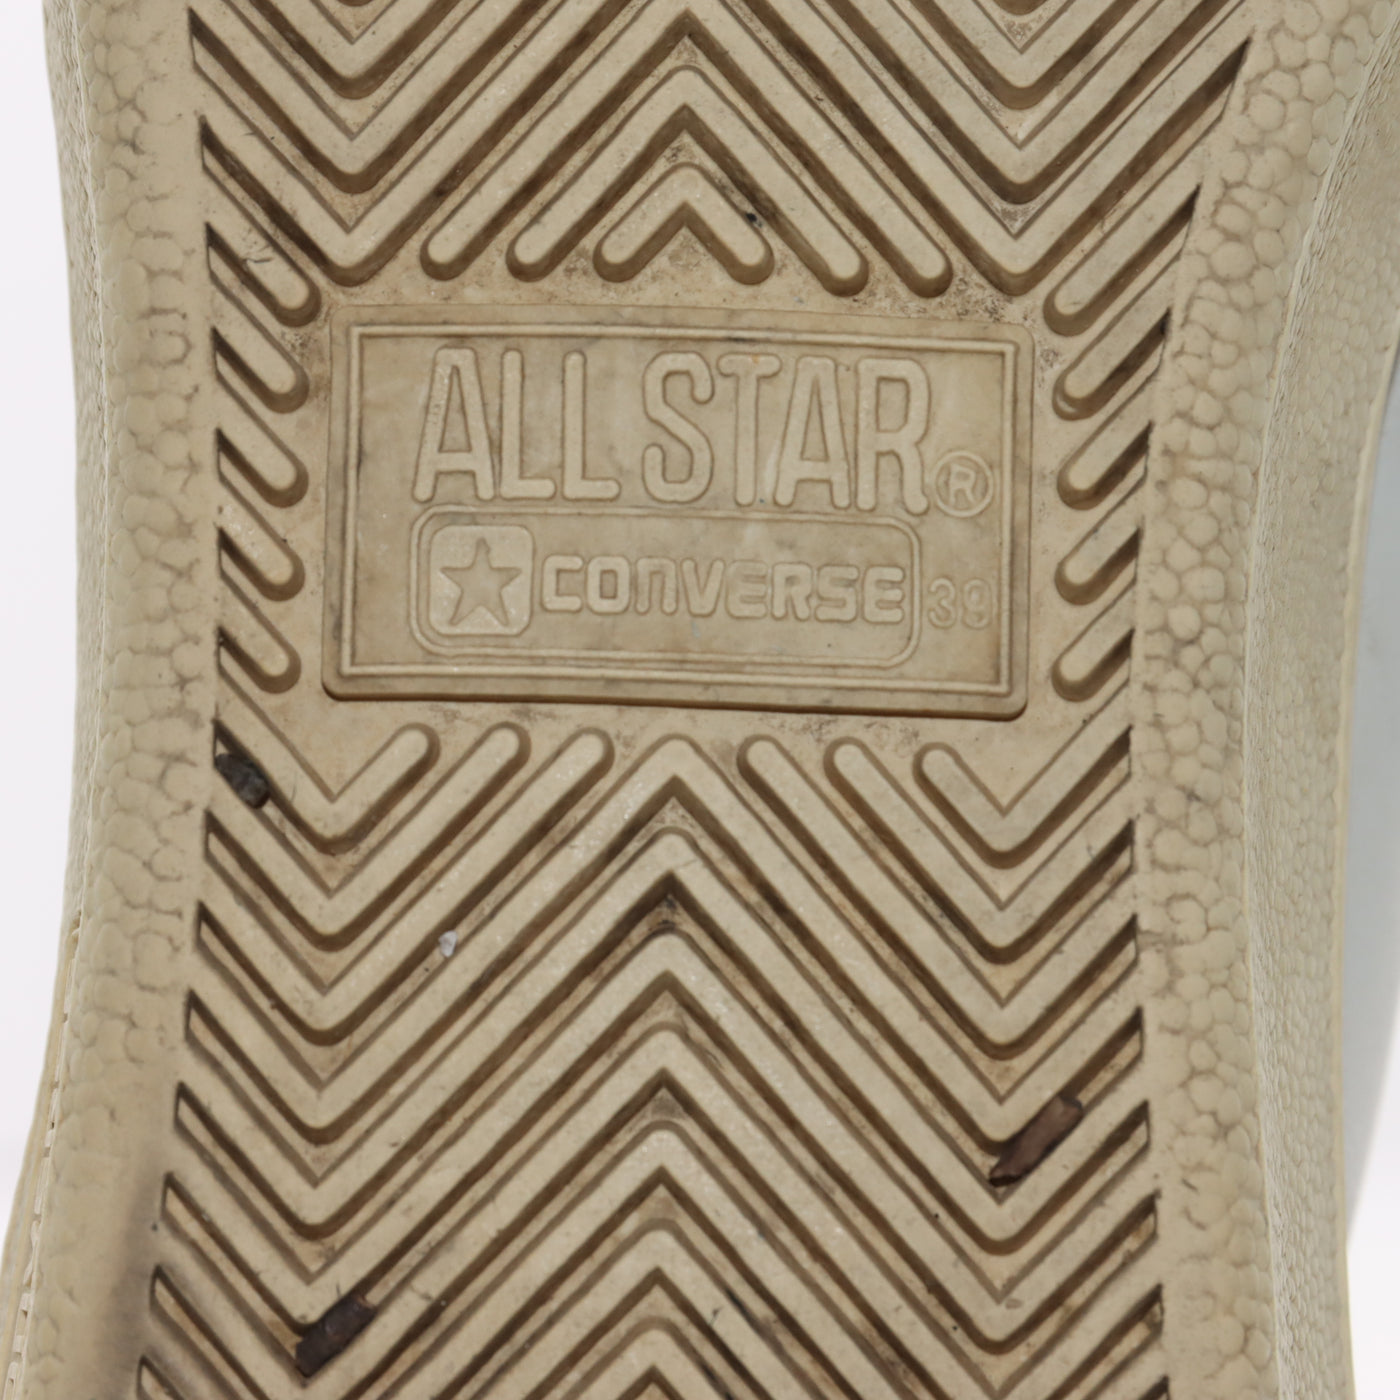 Converse All Star Basse Bianco Eur 39 Unisex Made in USA